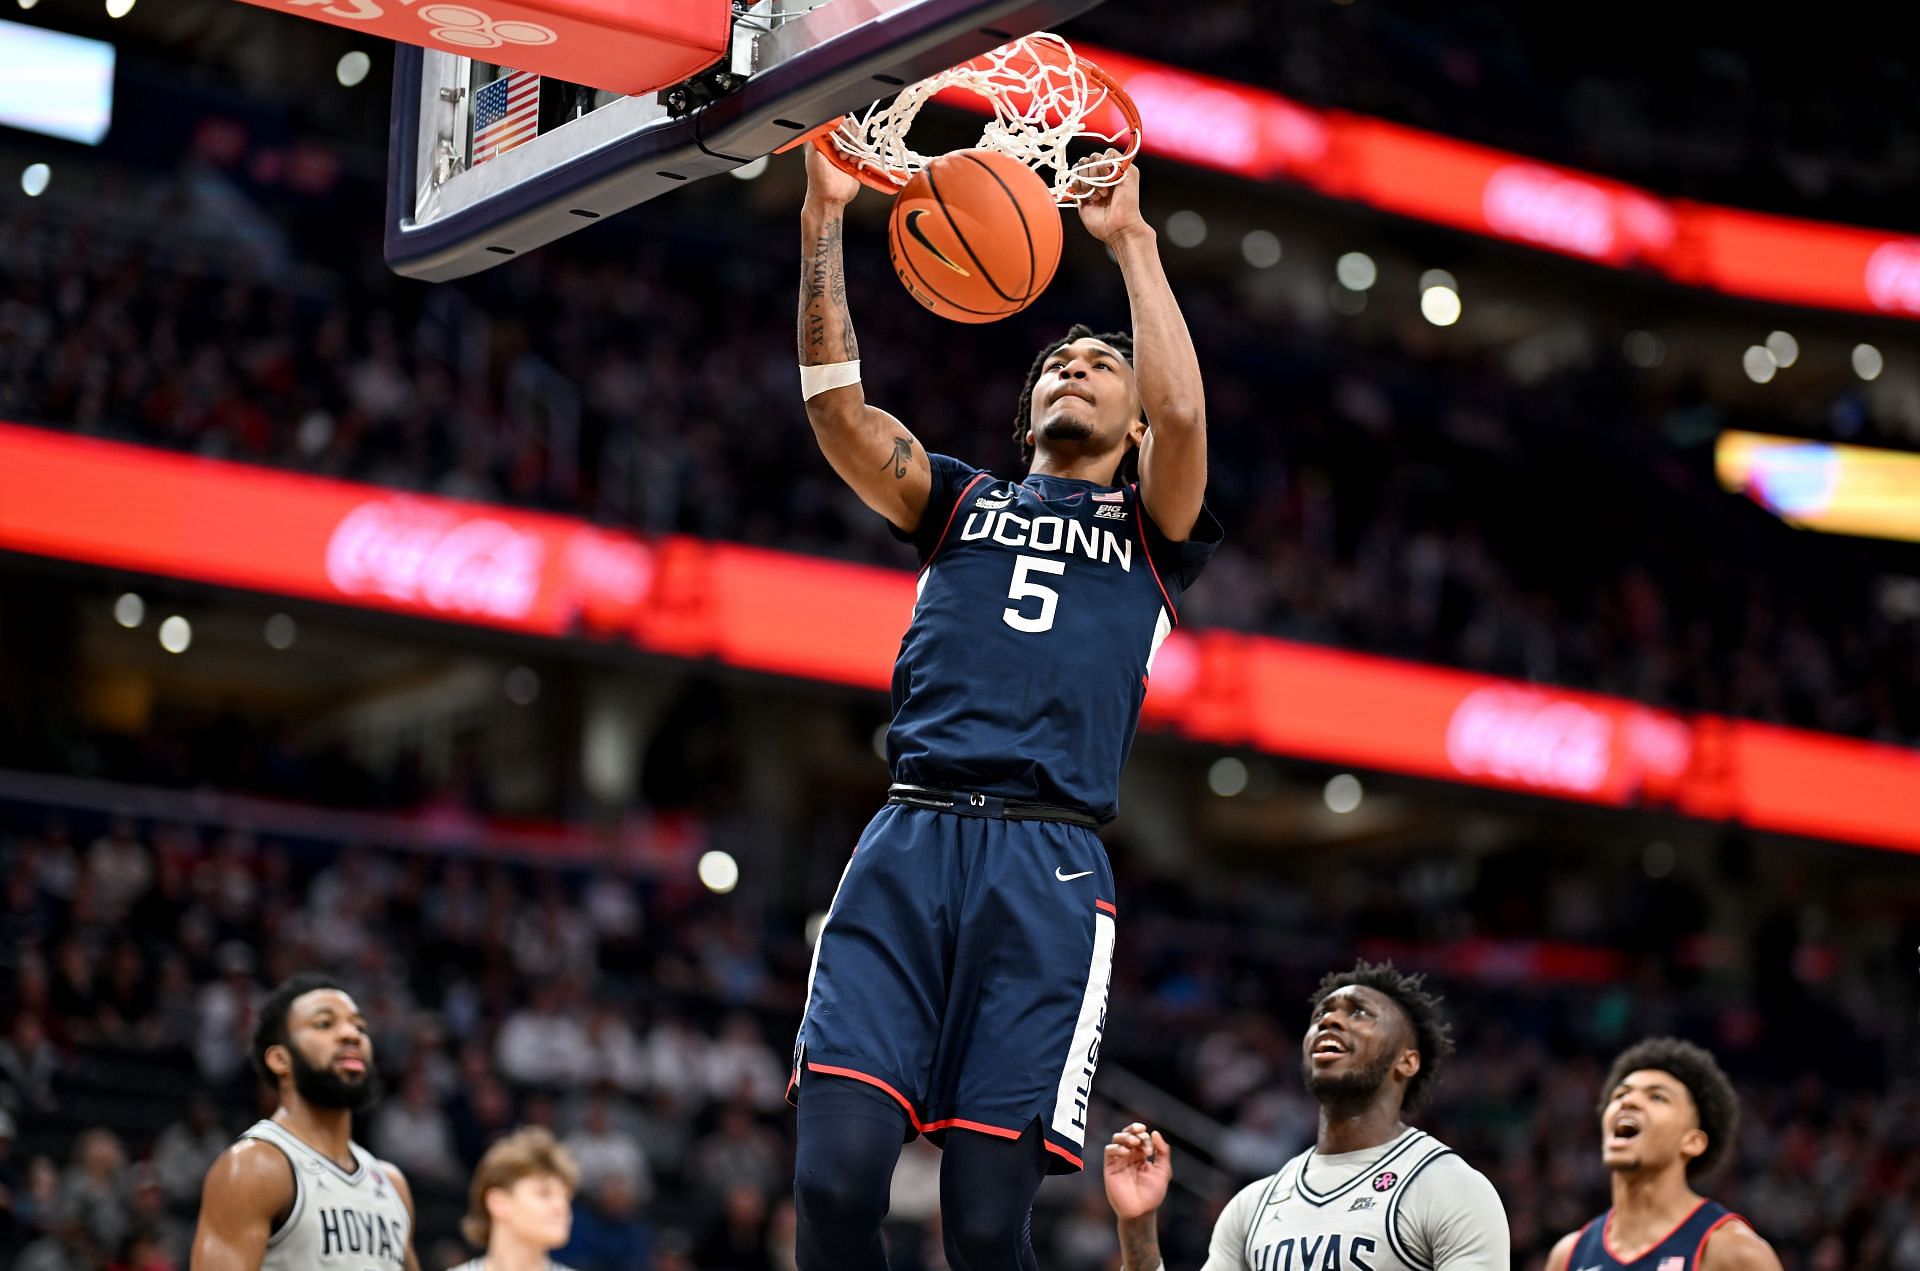 Stephon Castle leads a UConn team replete with a multitude of team strengths.